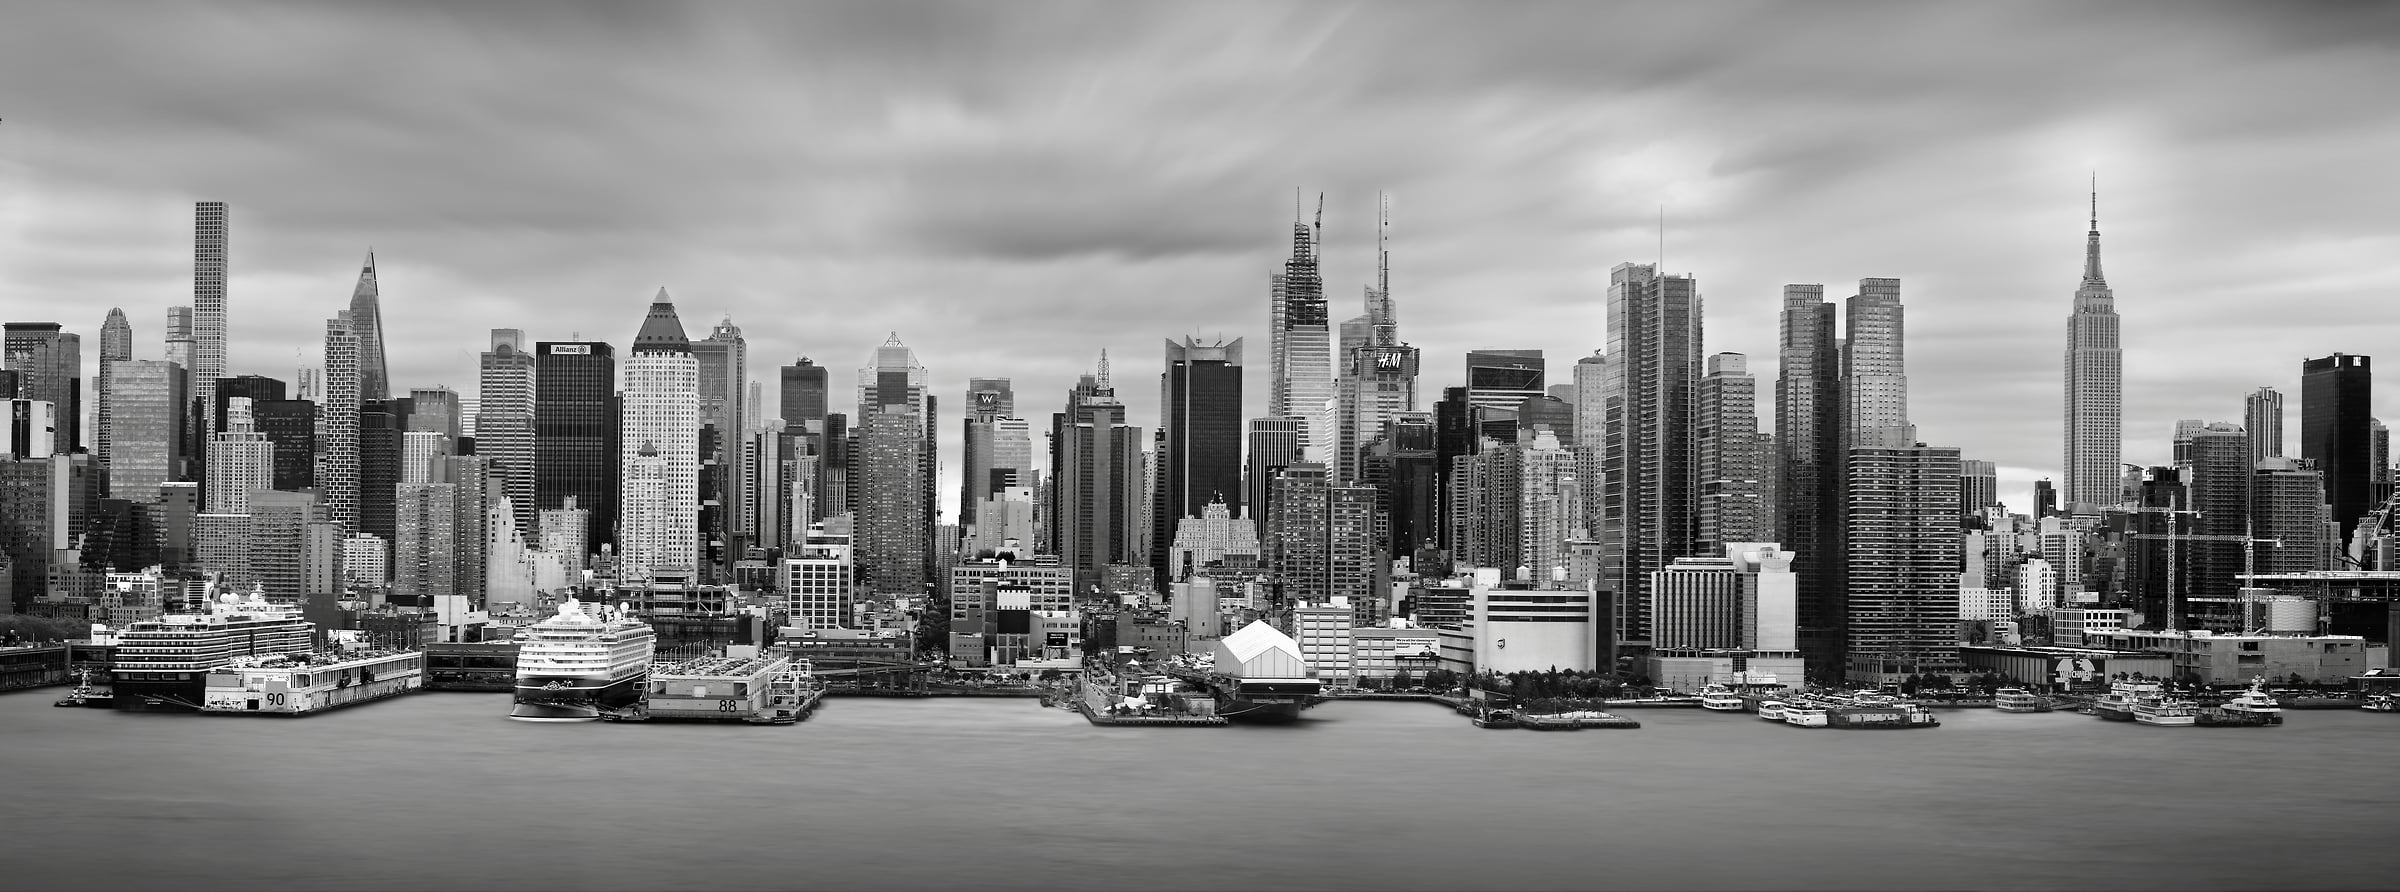 446 megapixels! A very high resolution, black & white, large-format VAST photo print of the Midtown Manhattan skyline and the Hudson River; fine art city photograph created by Phil Crawshay in New York, New York.